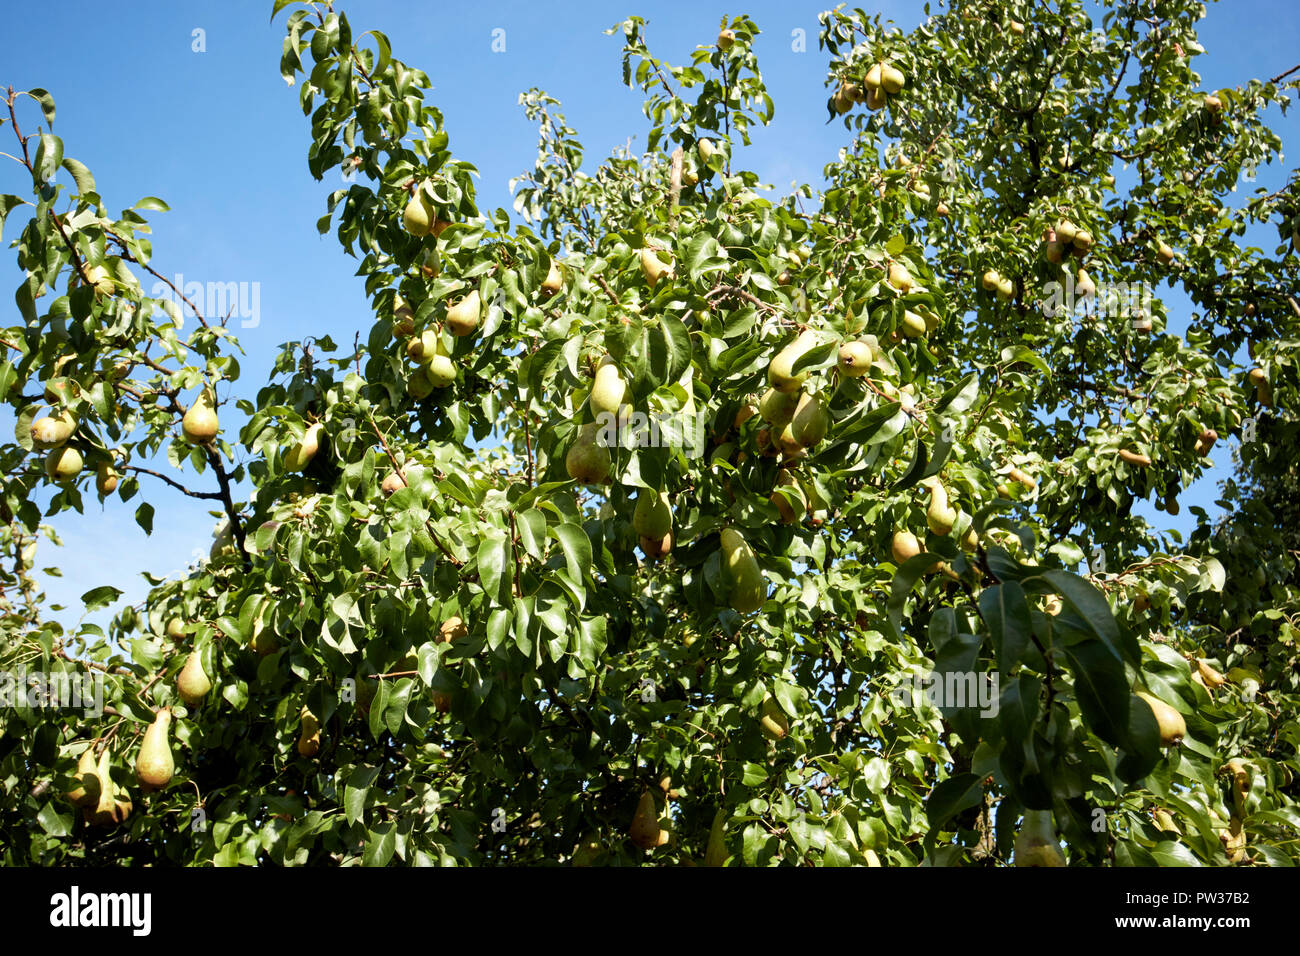 ripe pears growing on a garden pear tree after hot summer in Liverpool Merseyside England UK Stock Photo